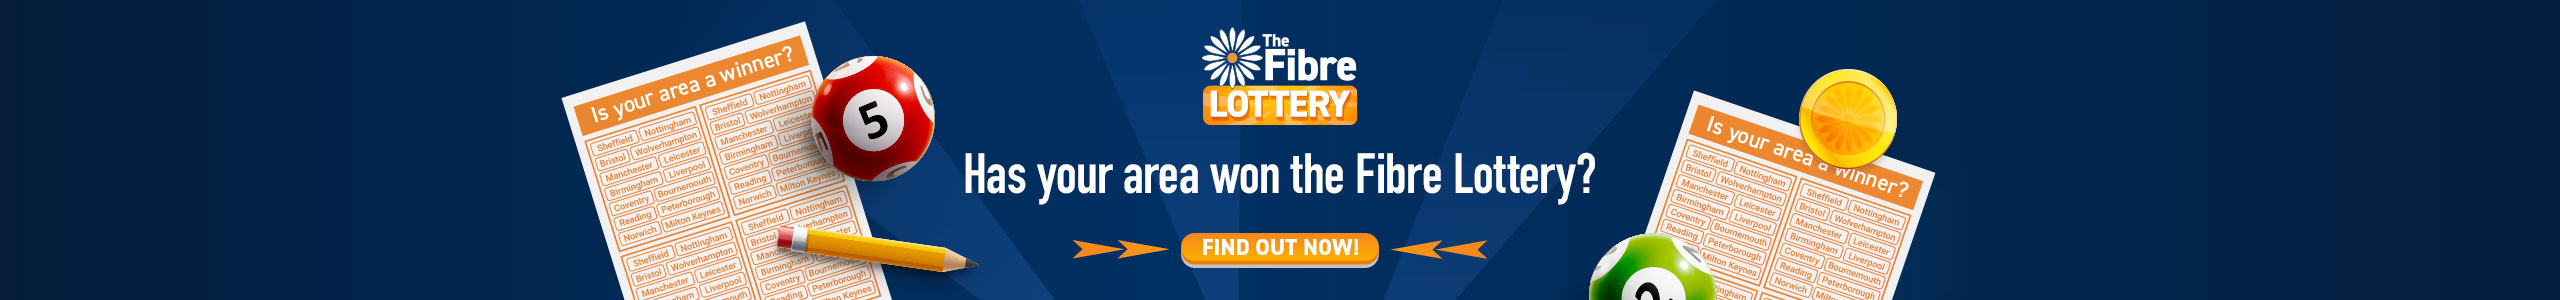 Fibre Lottery Home Page Baneer for Shop